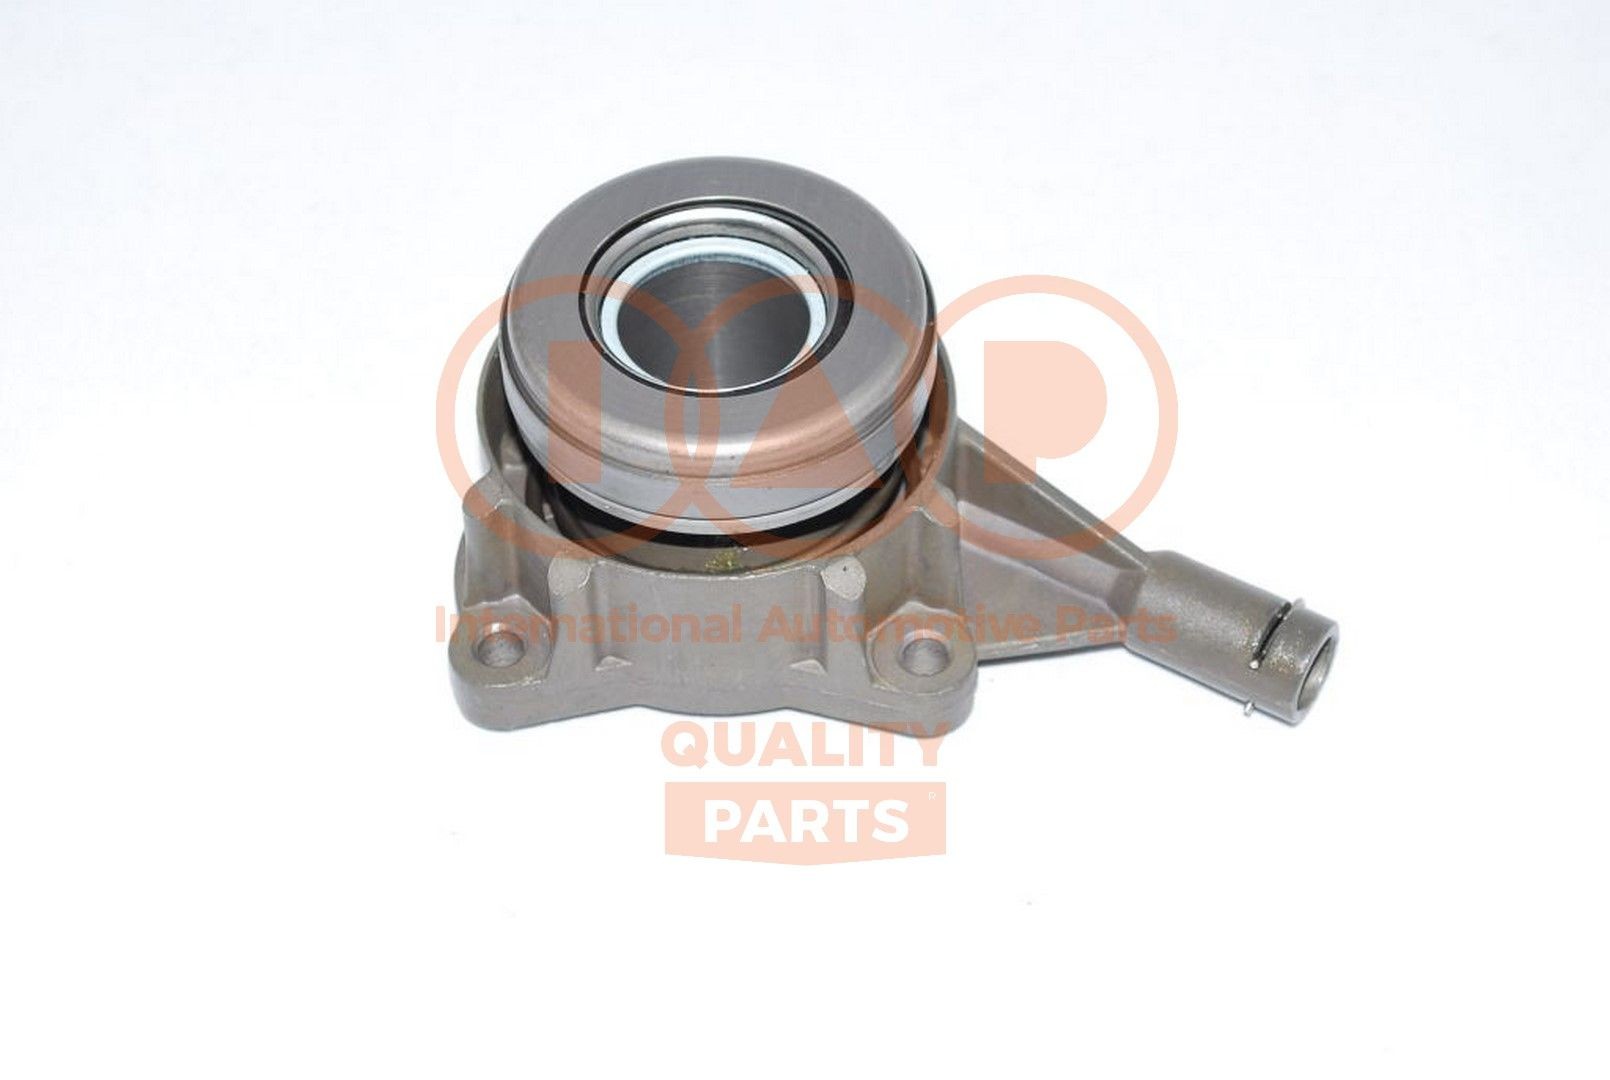 IAP QUALITY PARTS Clutch release bearing 204-14034 Ford TRANSIT 2006